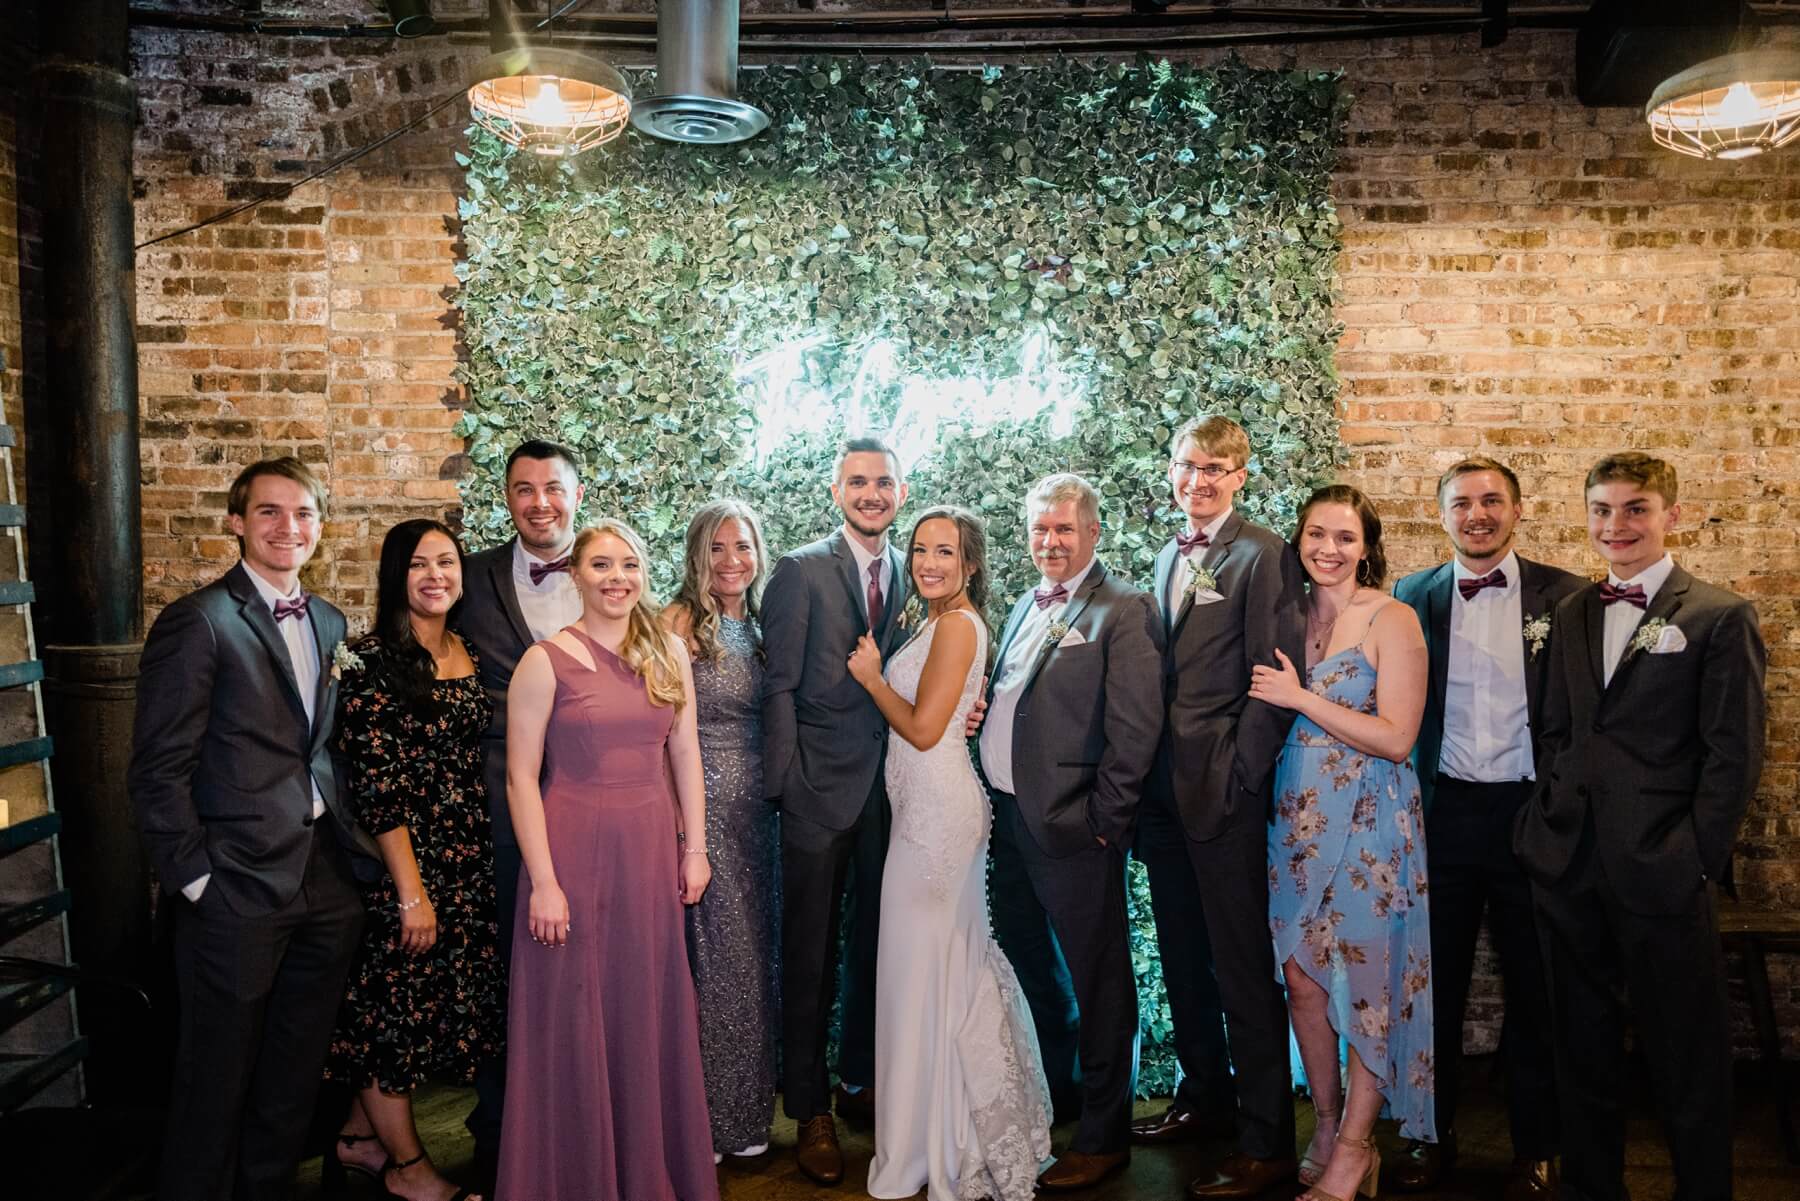 Bride and groom and their family standing in front of ivy wall with neon sign